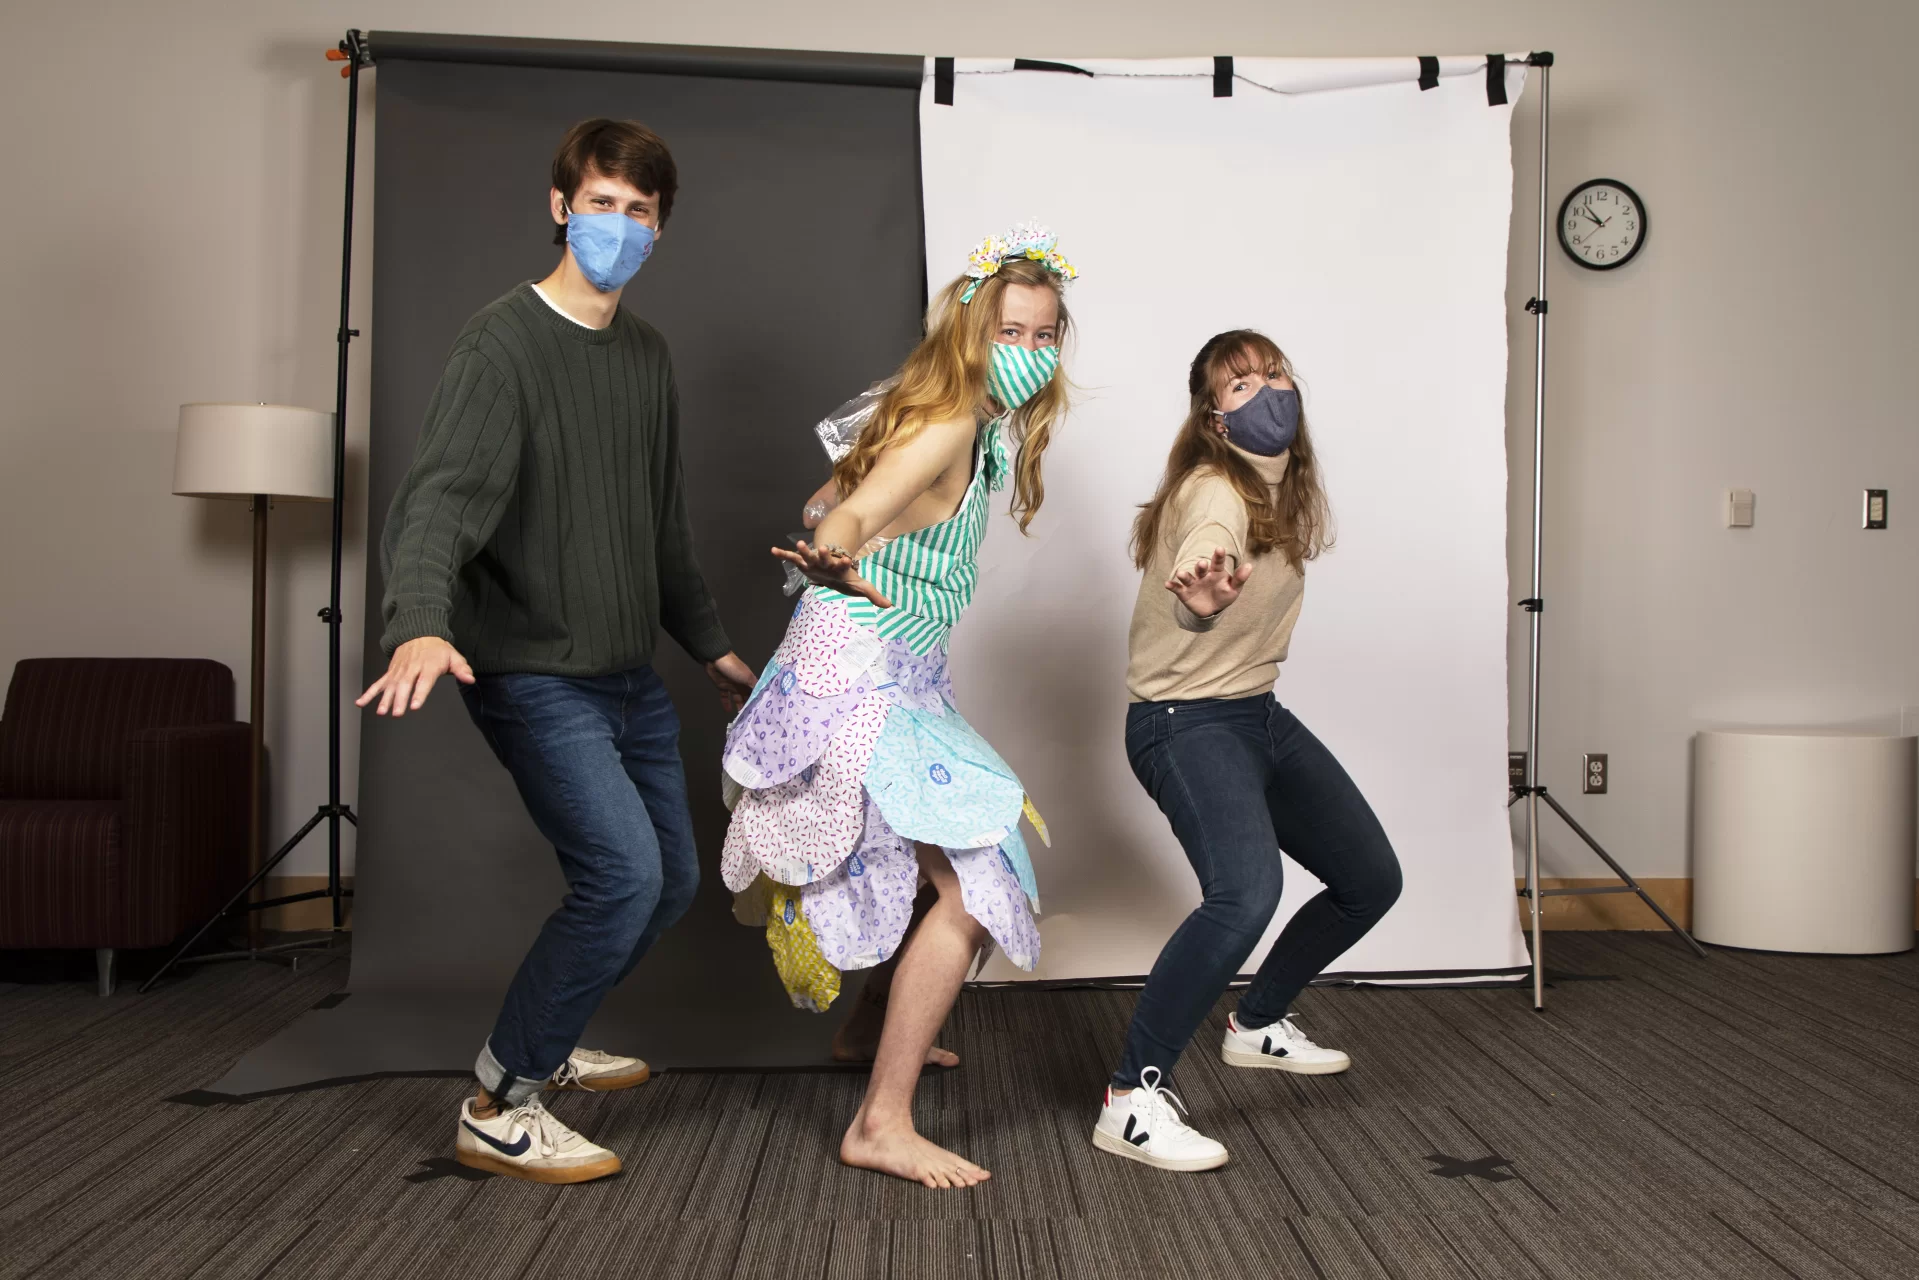 Essie Martin ‘22 of Newcastle, Maine, David Bilbrey ‘22 of Charlotte, N.C., and Hannah Webster ‘22 of Shelburne, Vermont, pose for portraits dressed in attire created for this years Trashion Show on November 15, 2021.